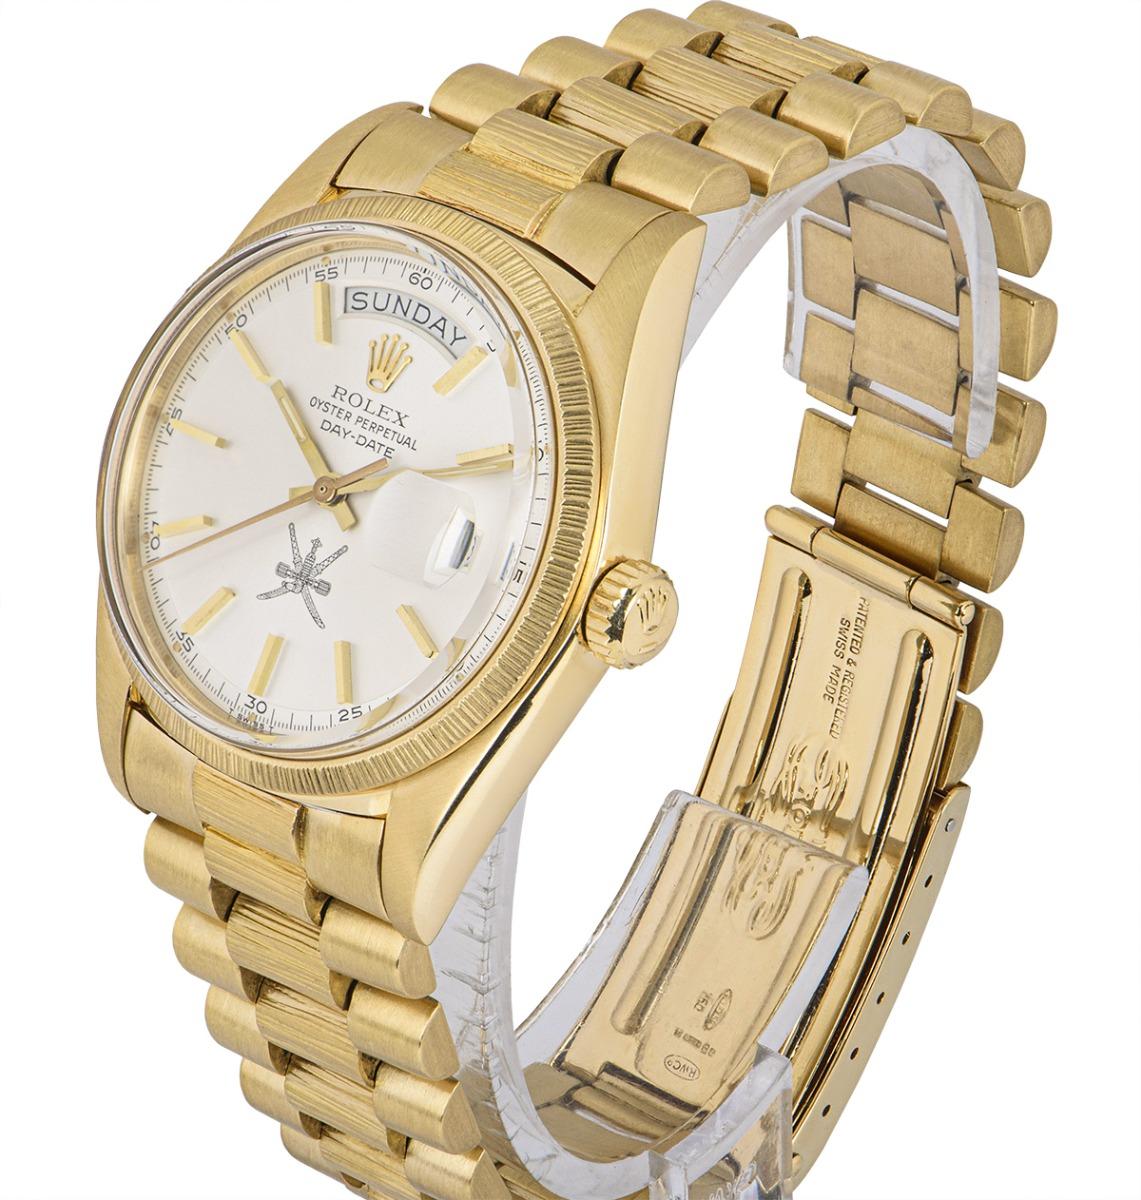 Rolex Rare Day-Date Vintage Men's 18K Yellow Gold Omani Dial Bark Finish 1807 For Sale 2